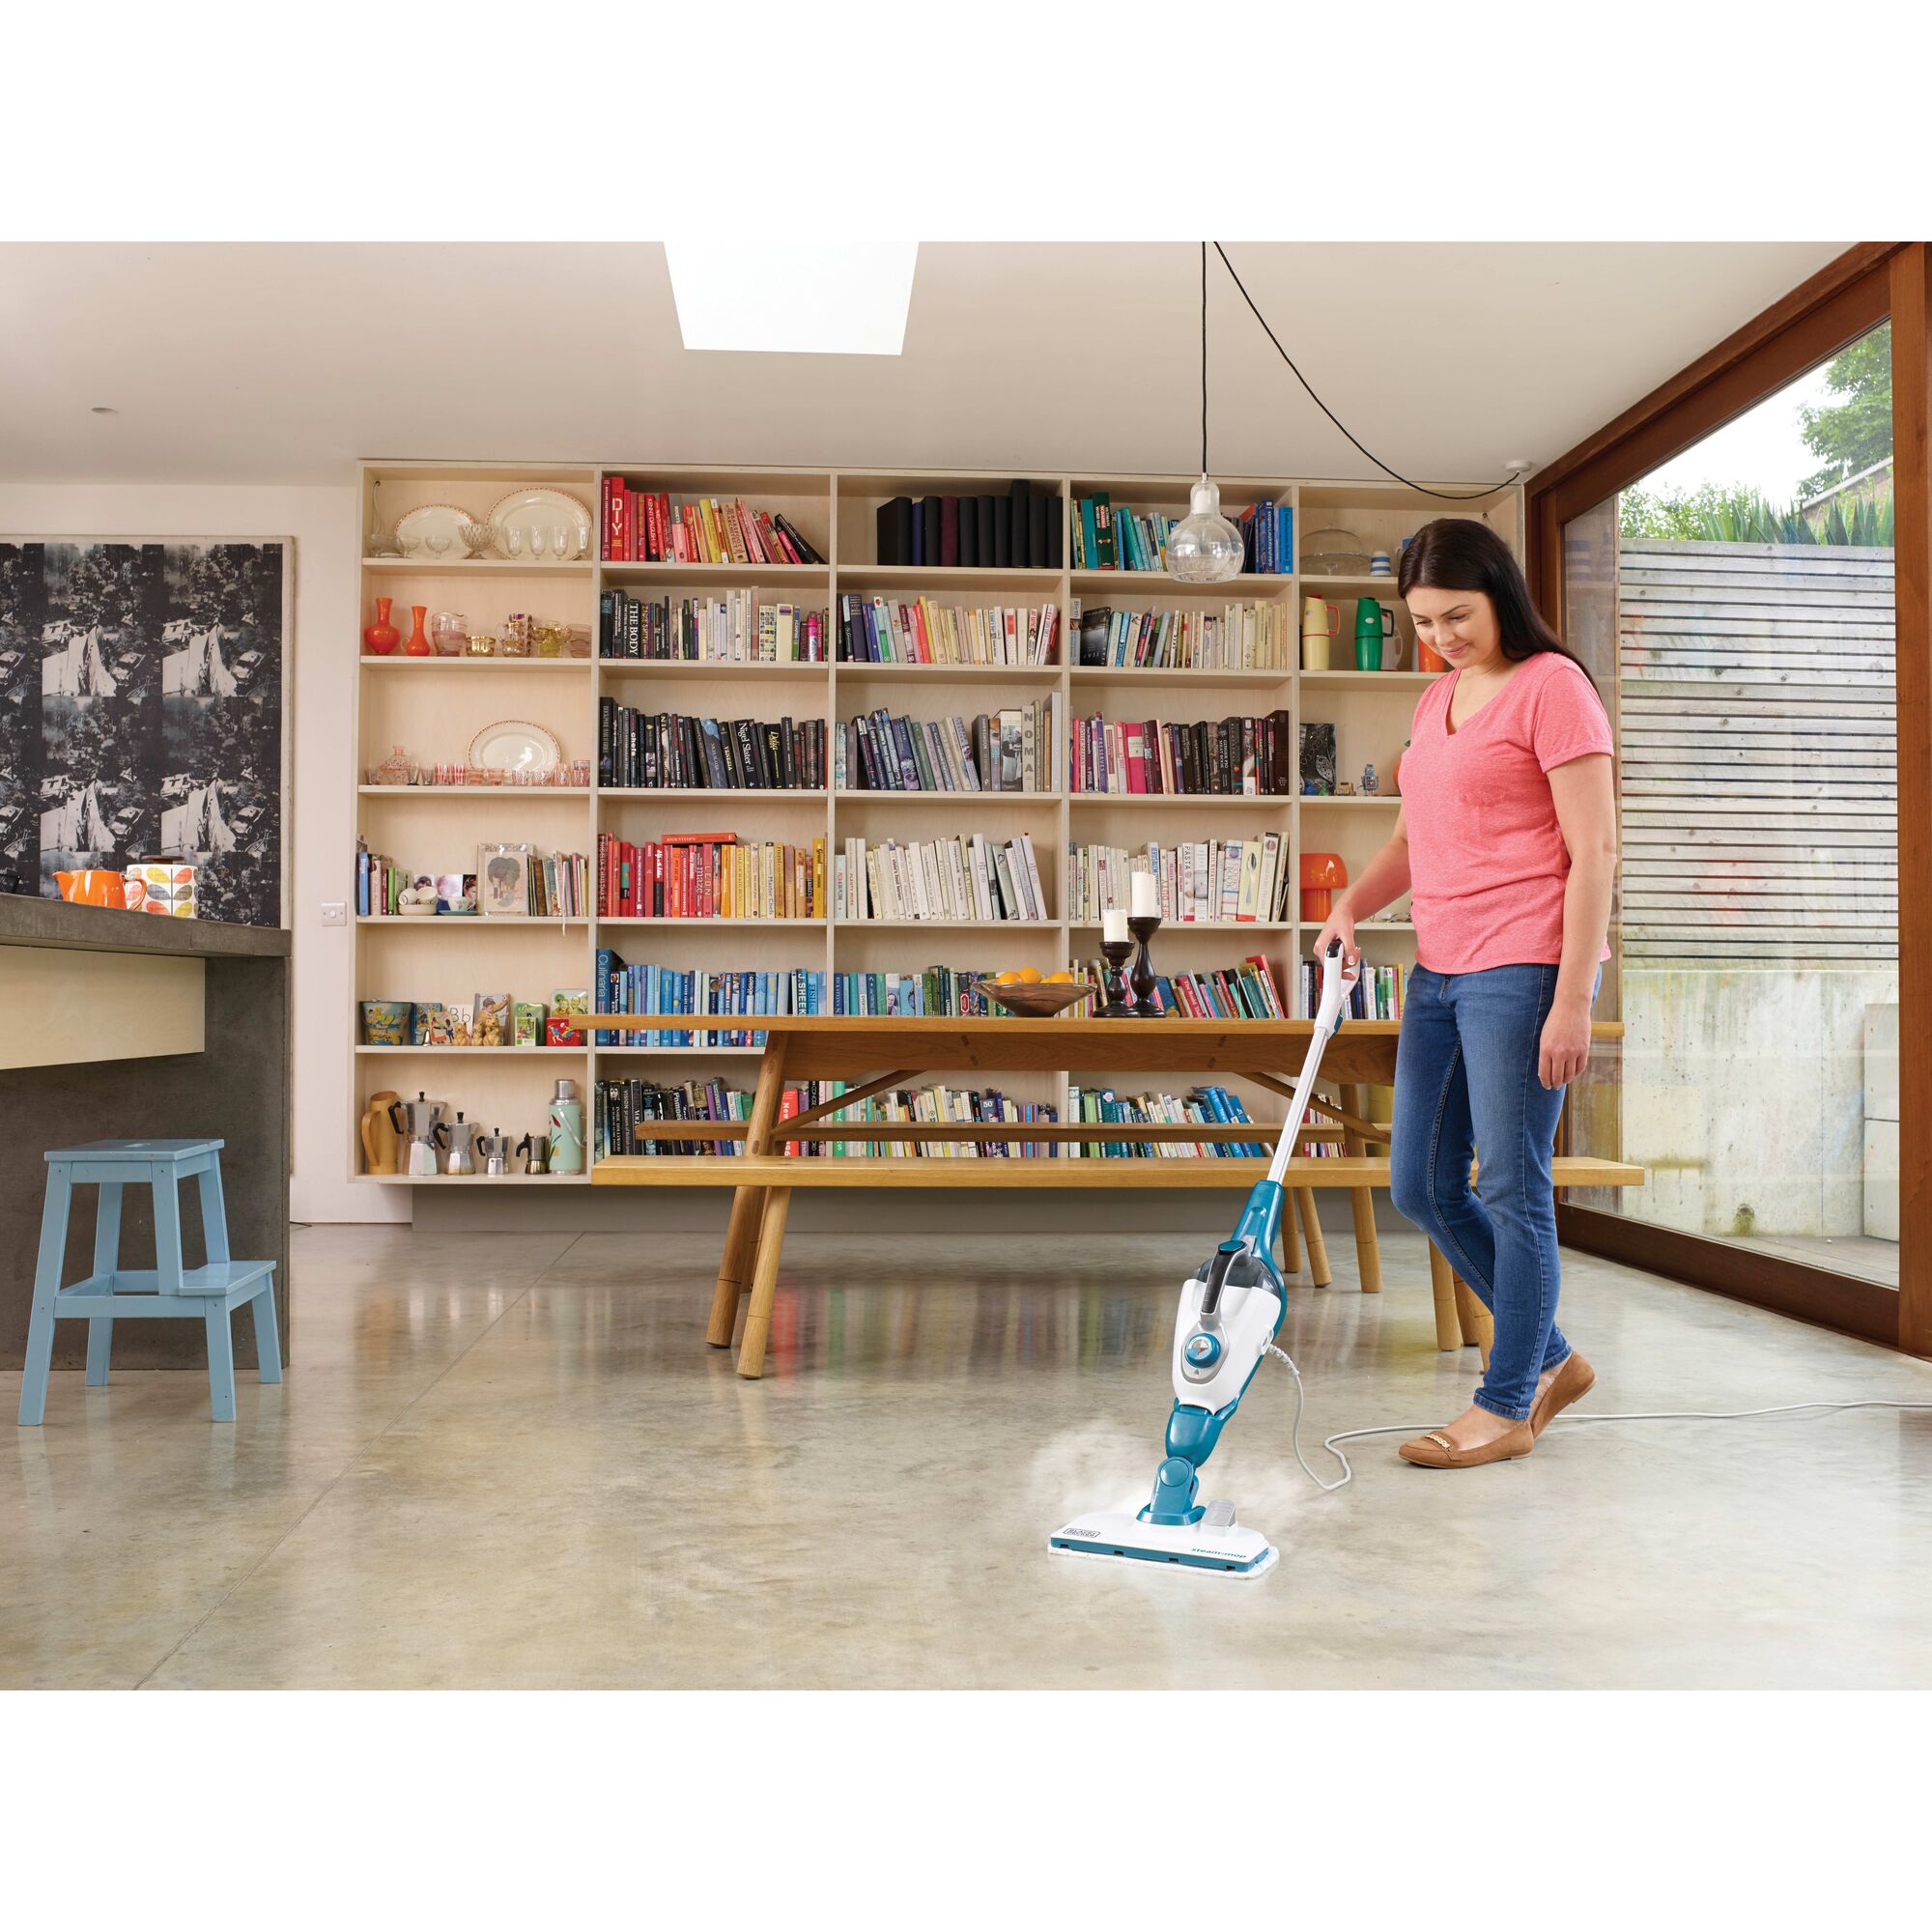 7 in 1 steam mop with steamglove handheld steamer be in g used to steam the floor by a person in a room.